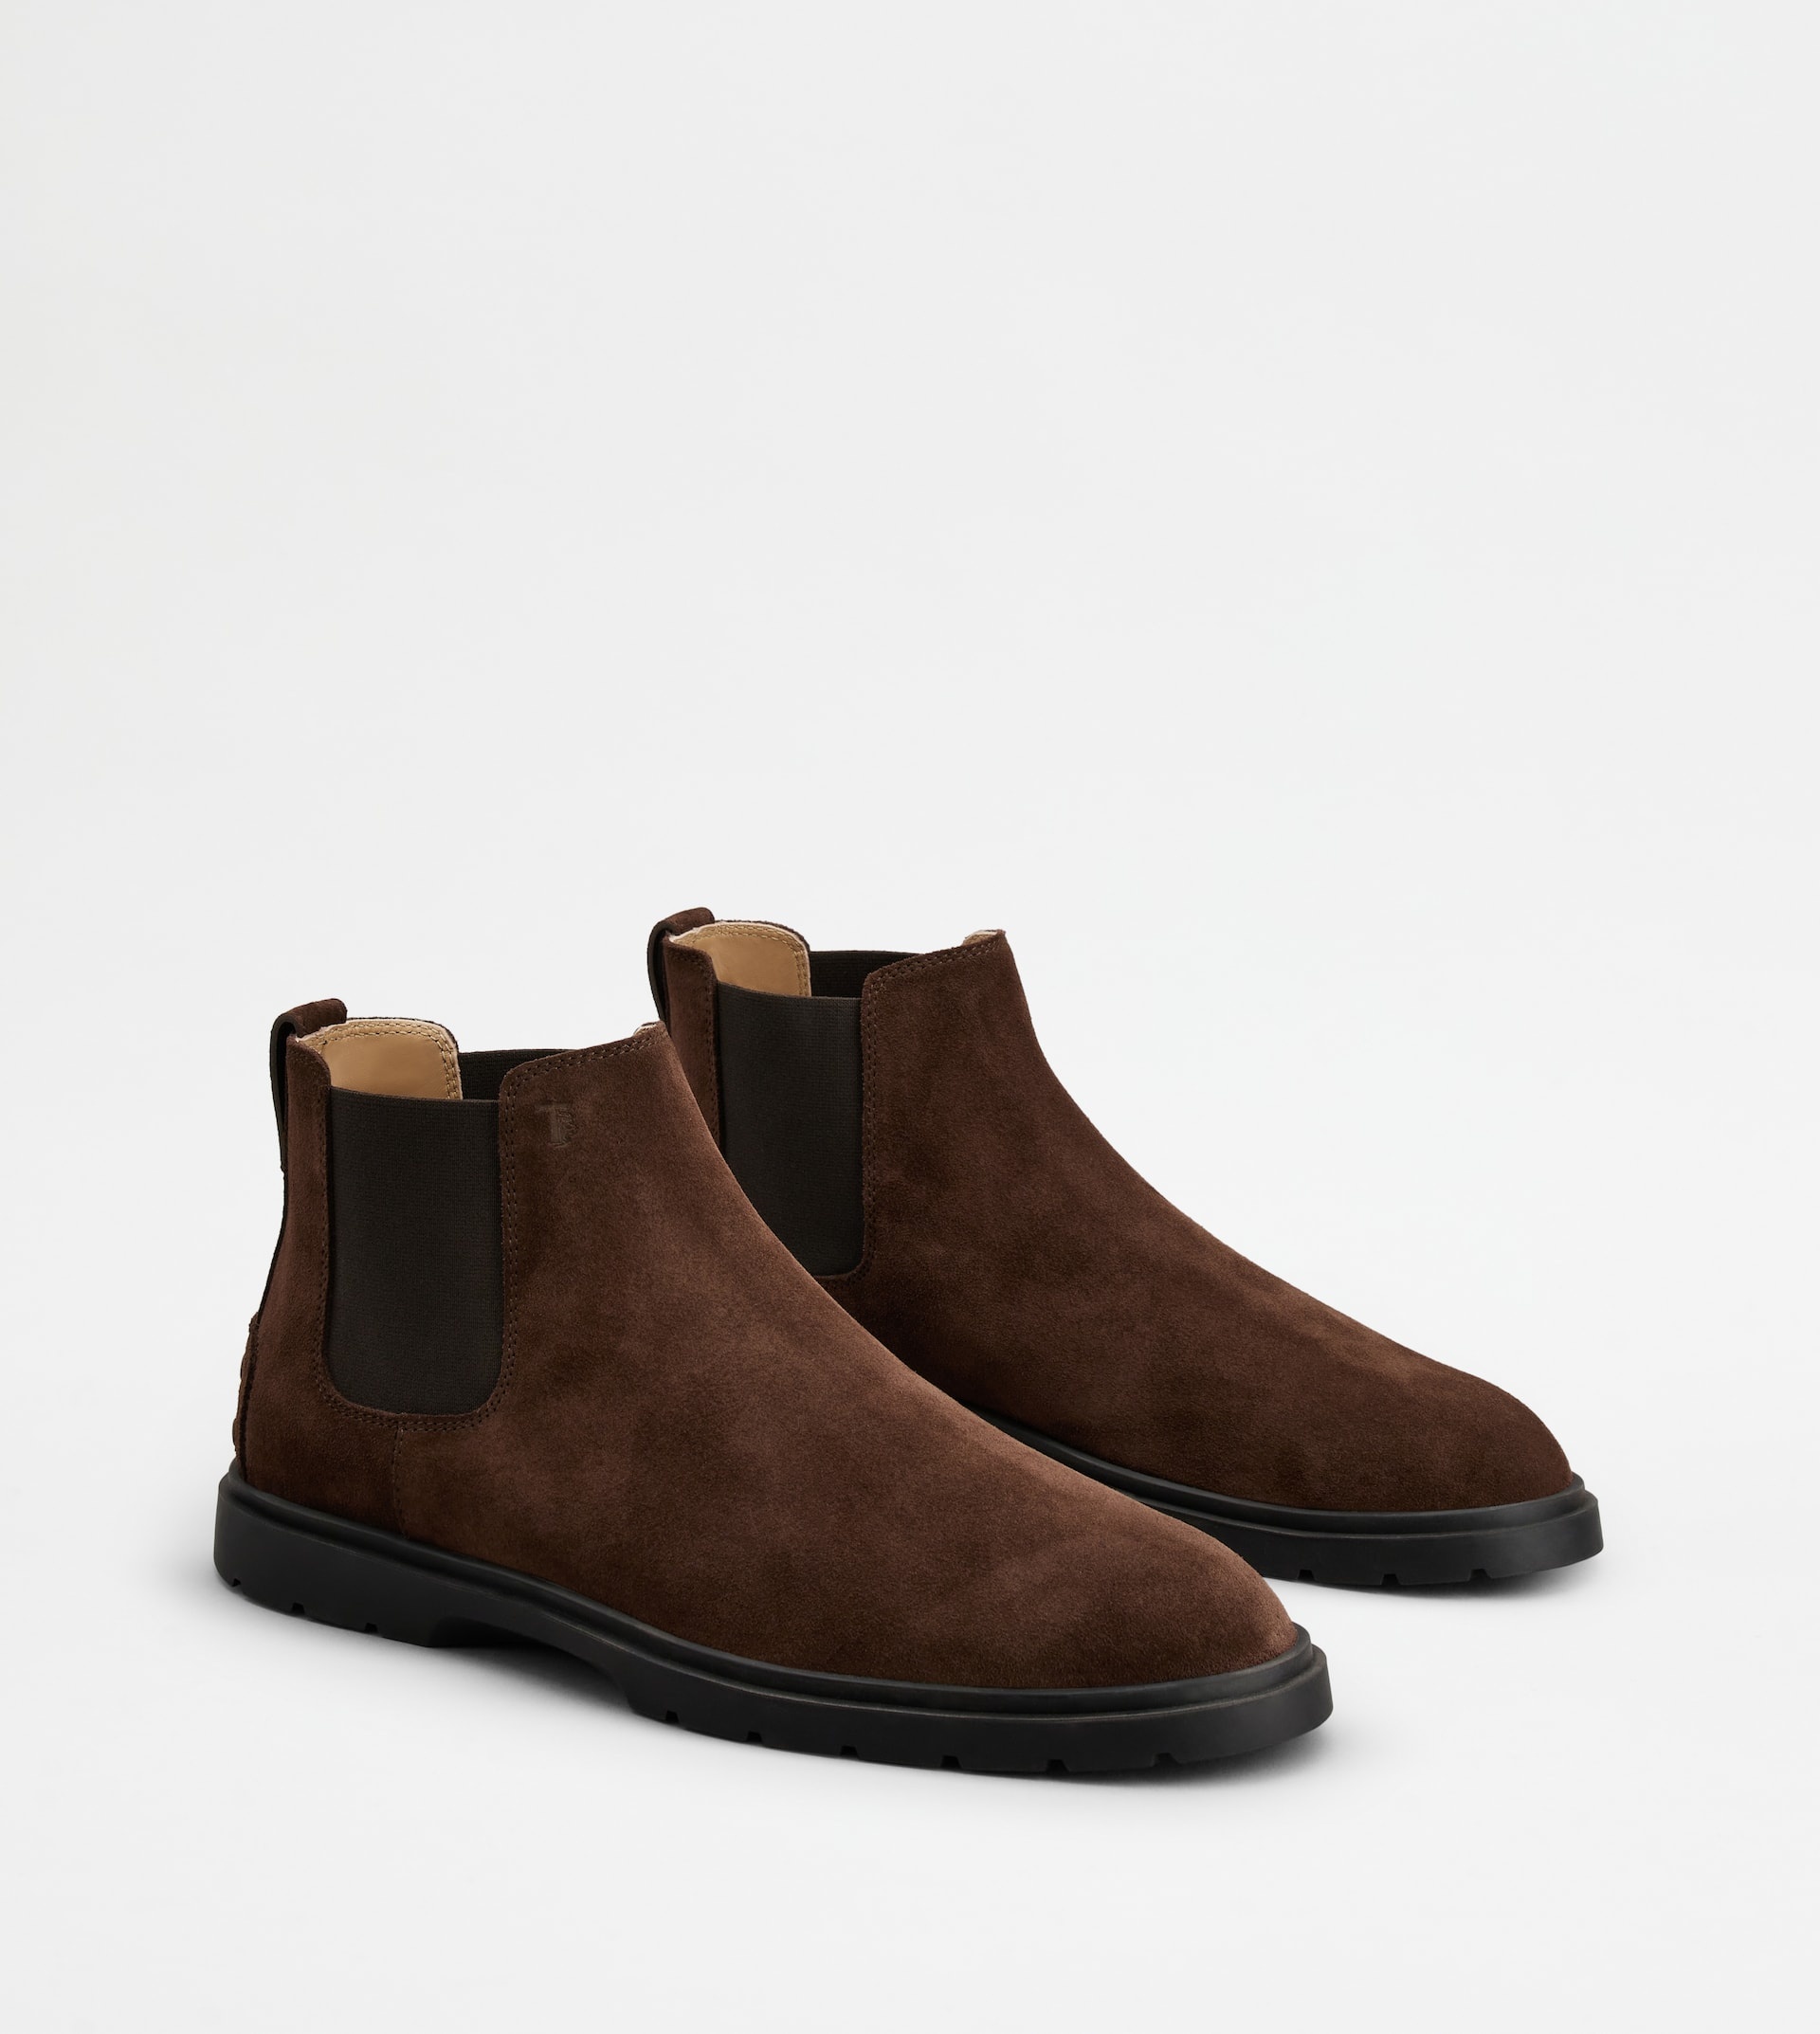 CHELSEA BOOTS IN SUEDE - BROWN - 3